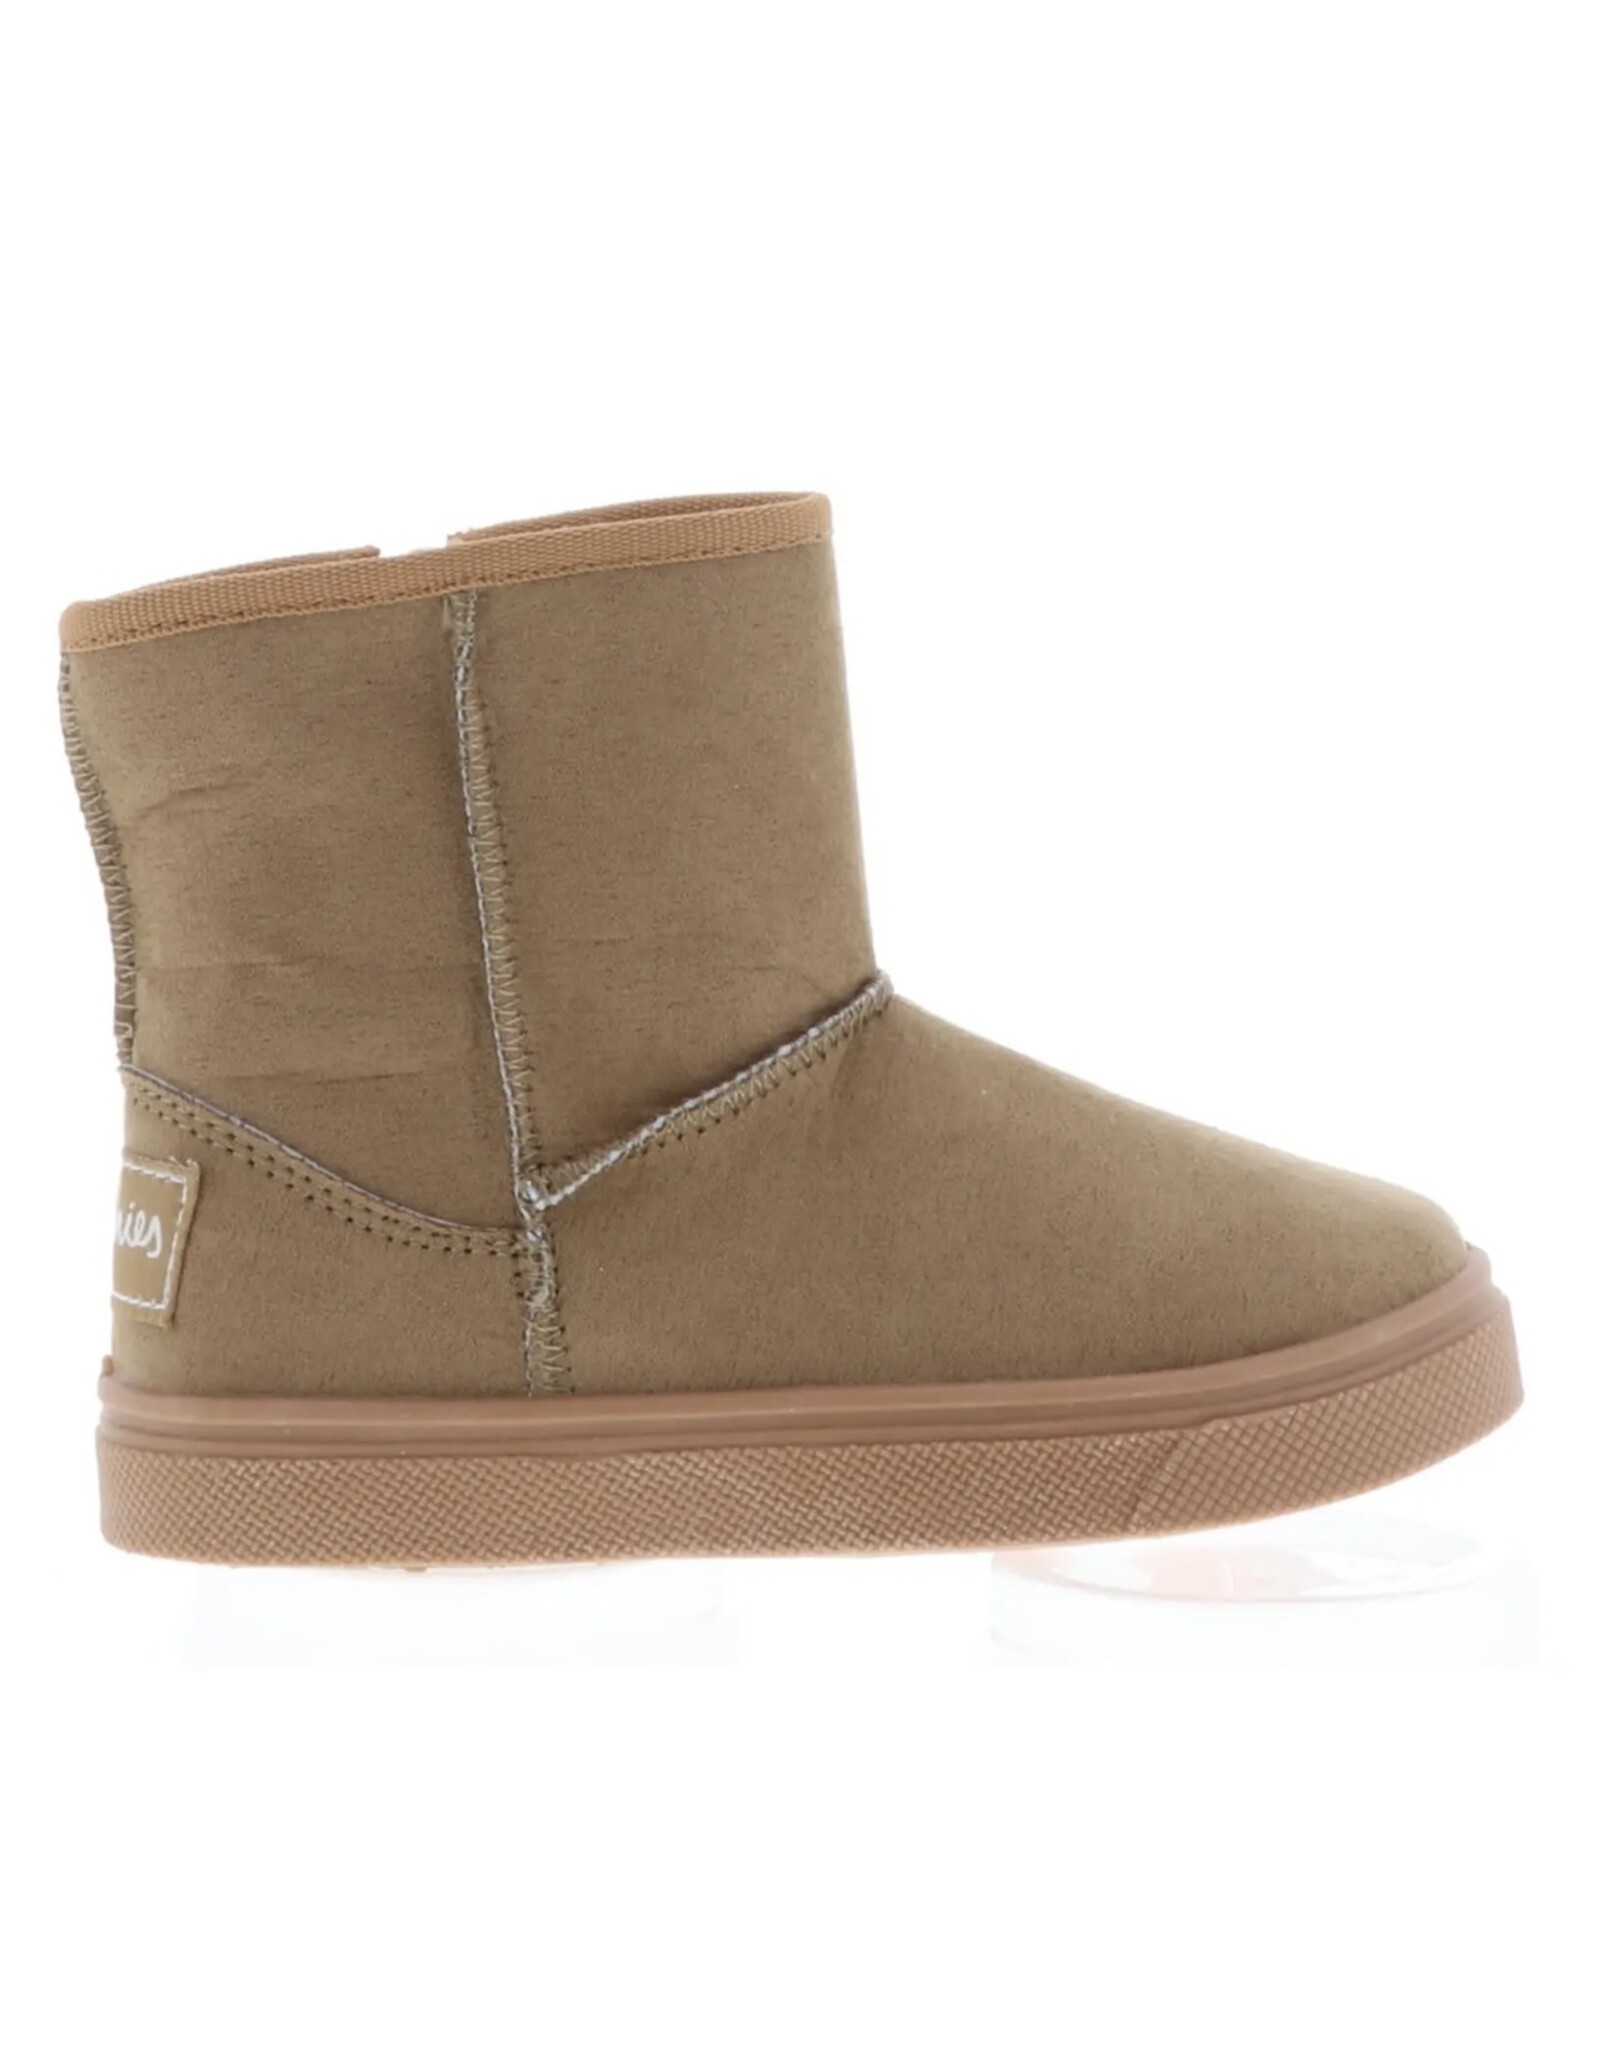 Oomphies Oomphies- Frost Boot: Chesnut